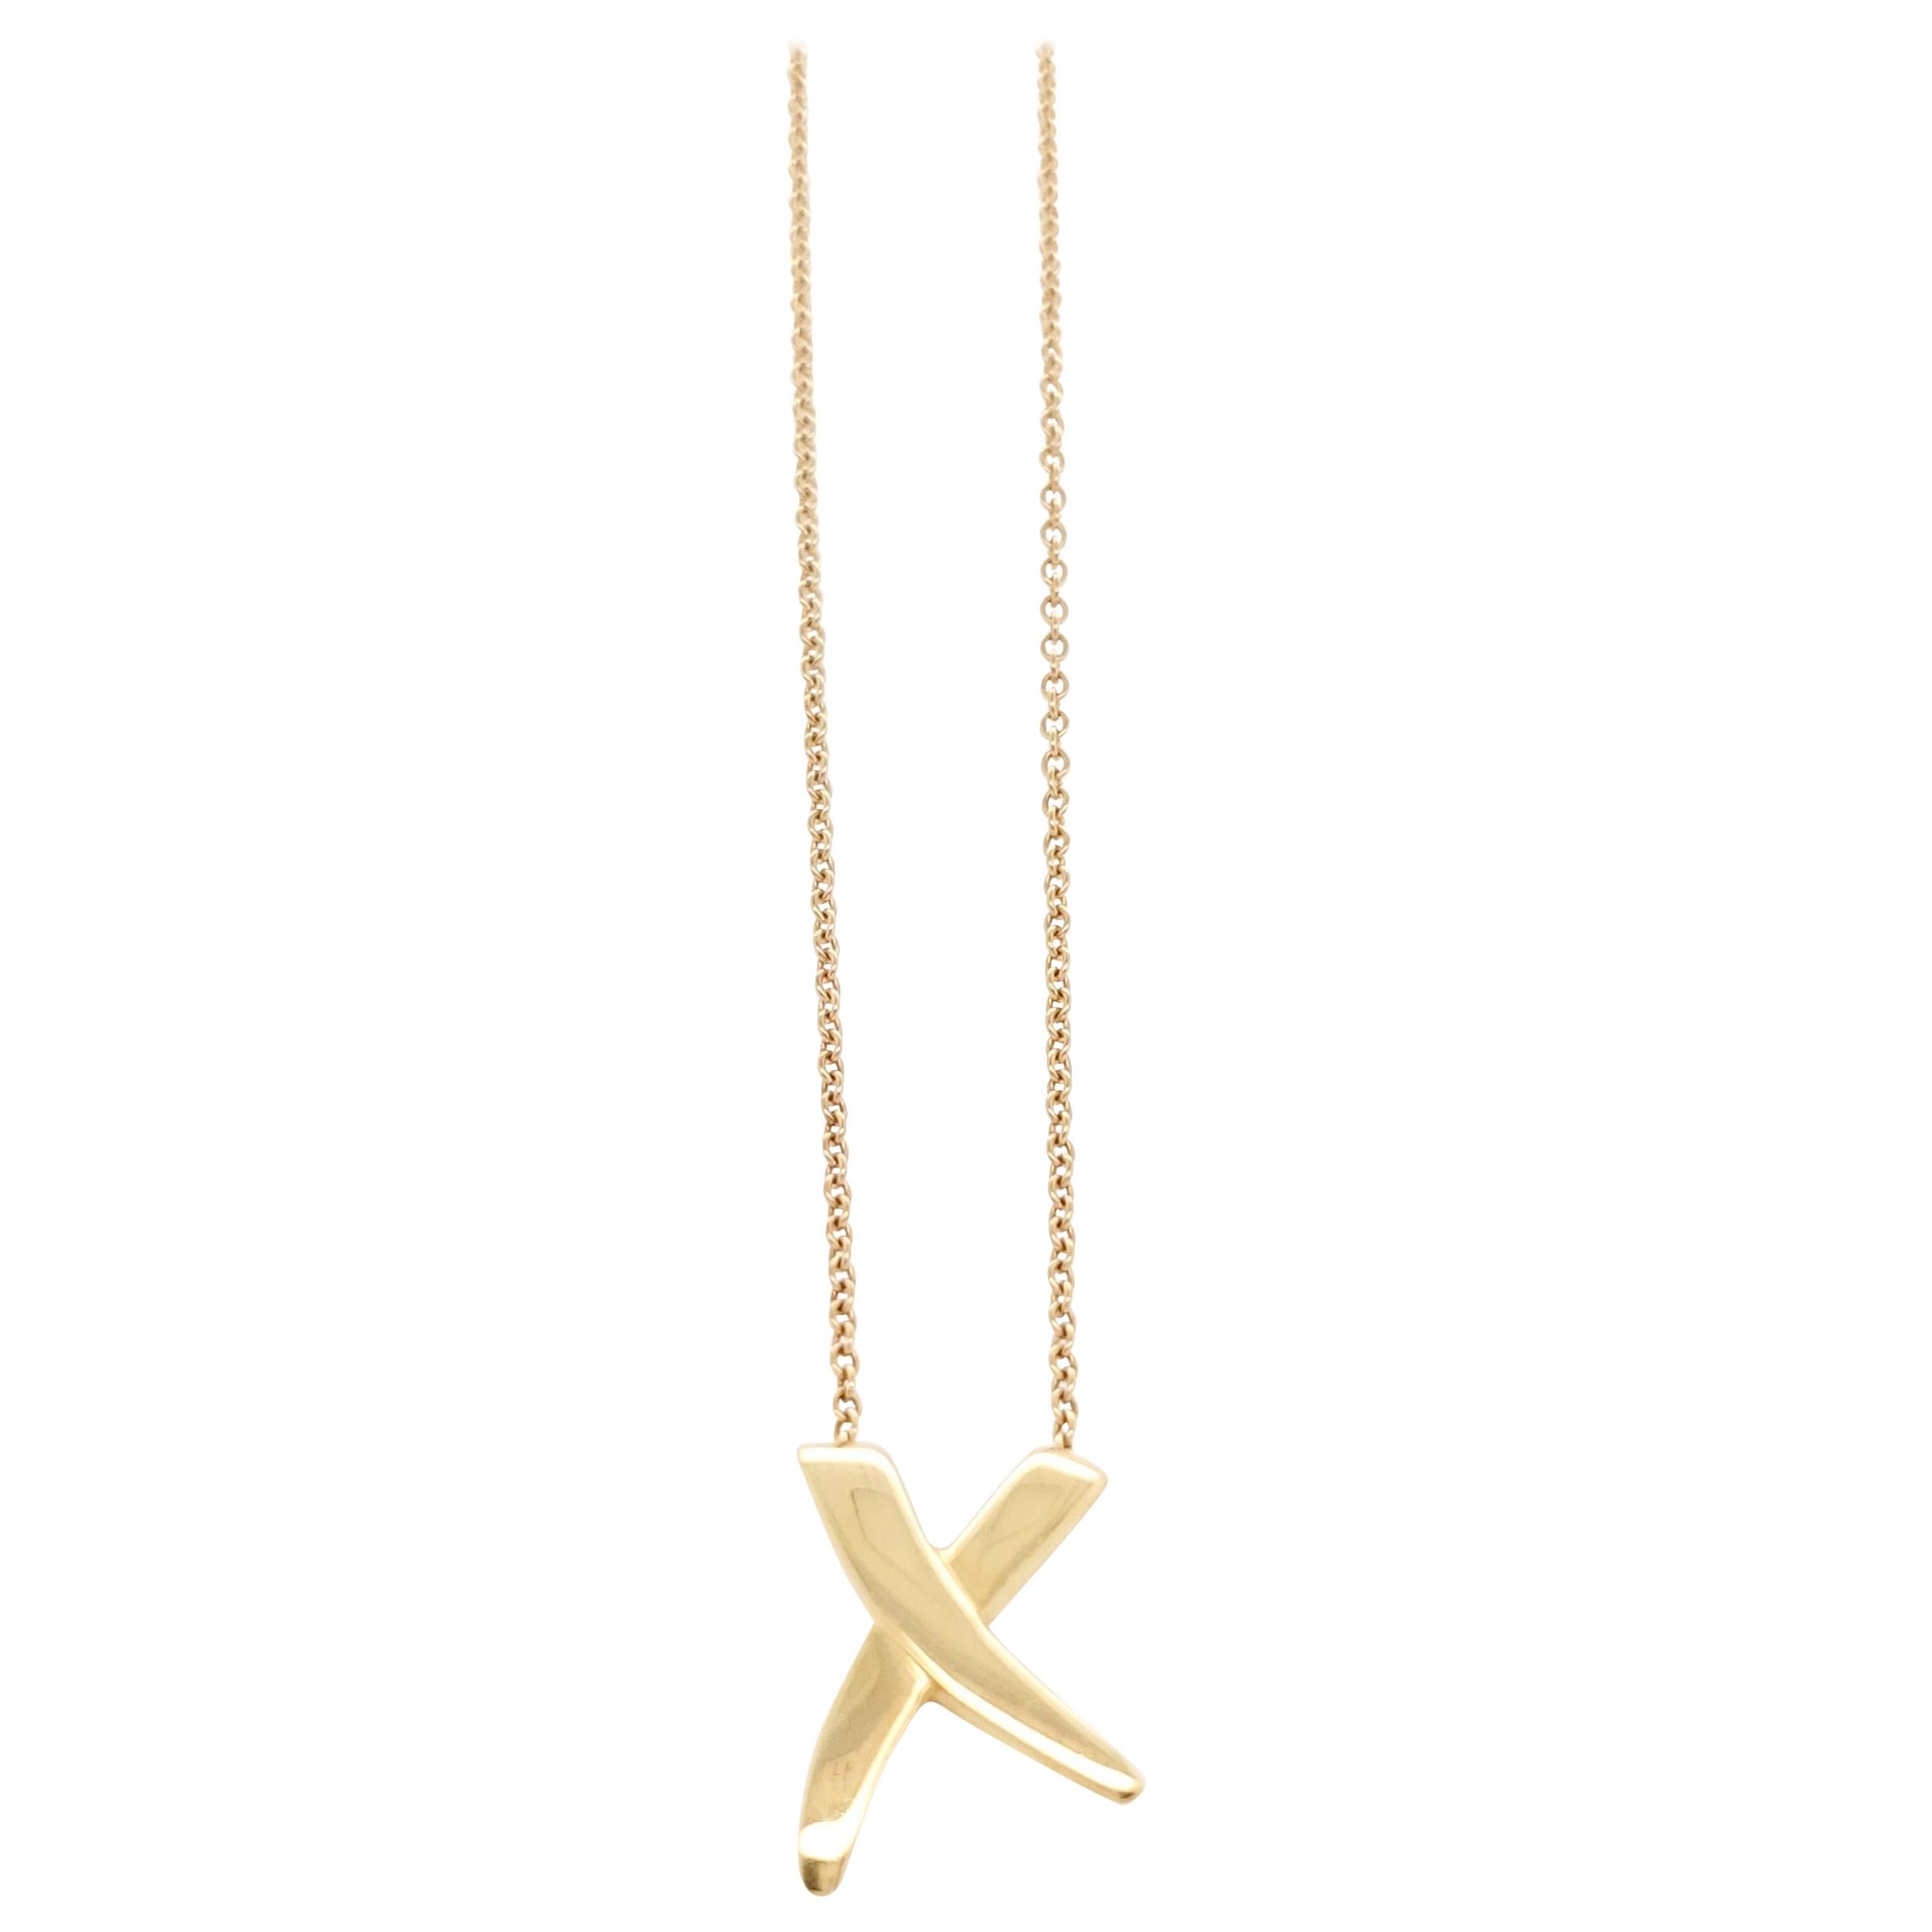 Tiffany & Co. Paloma Picasso Gold Necklace